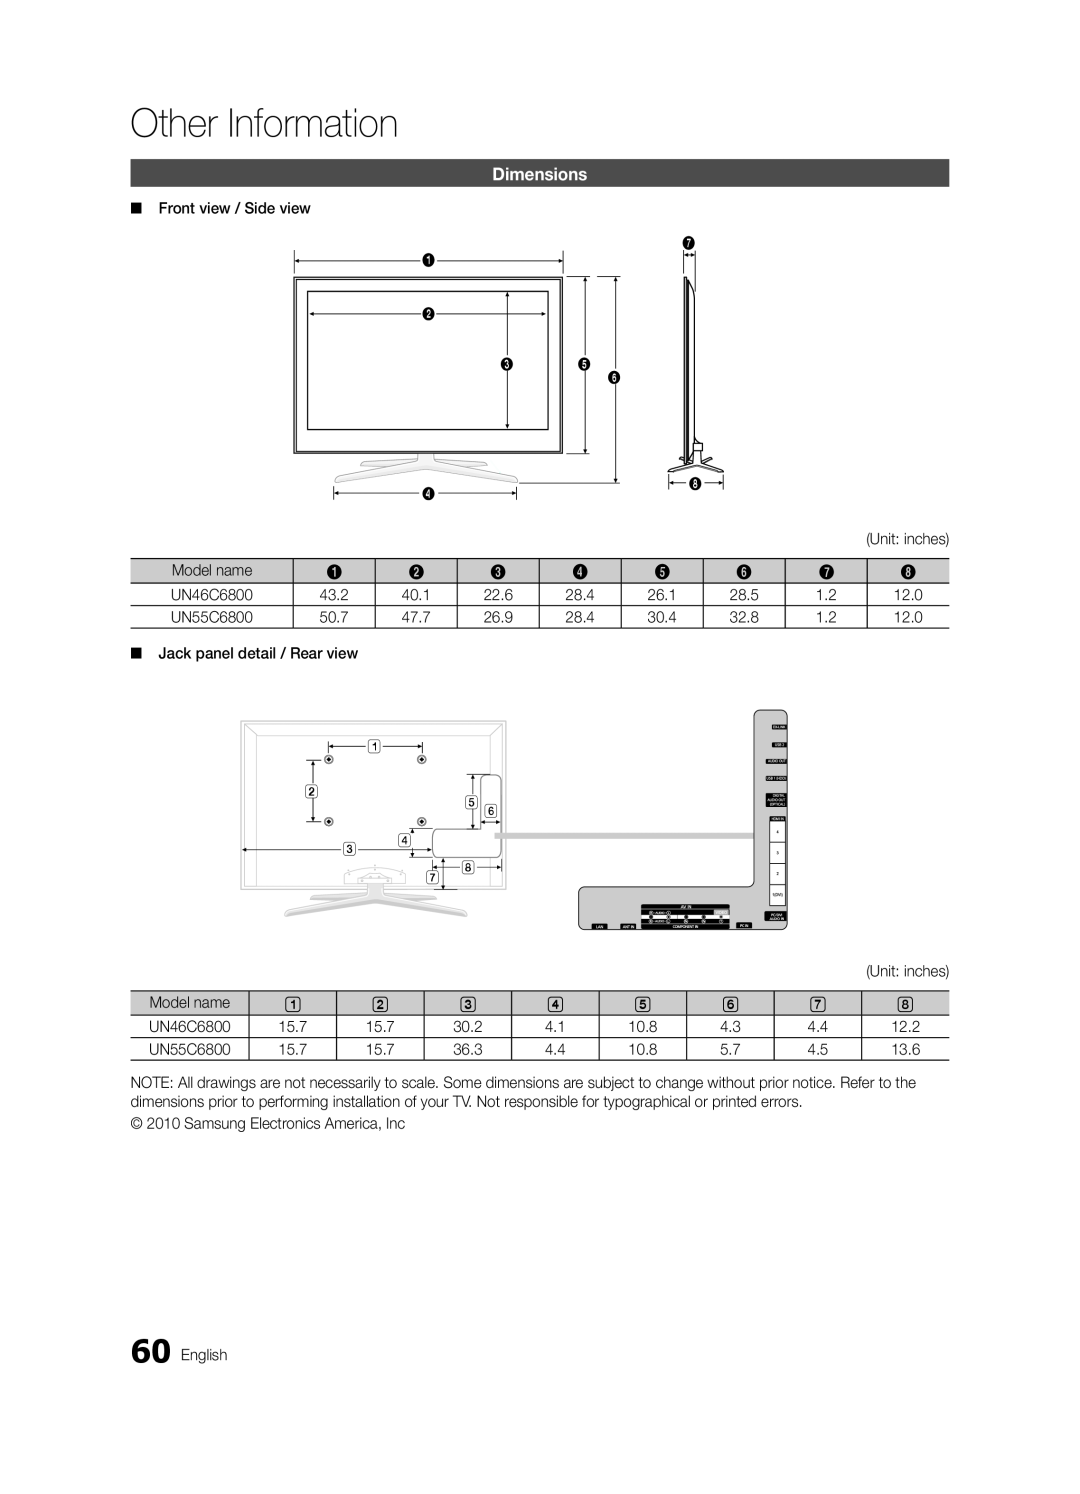 Samsung 6800 user manual Dimensions, Other Information 